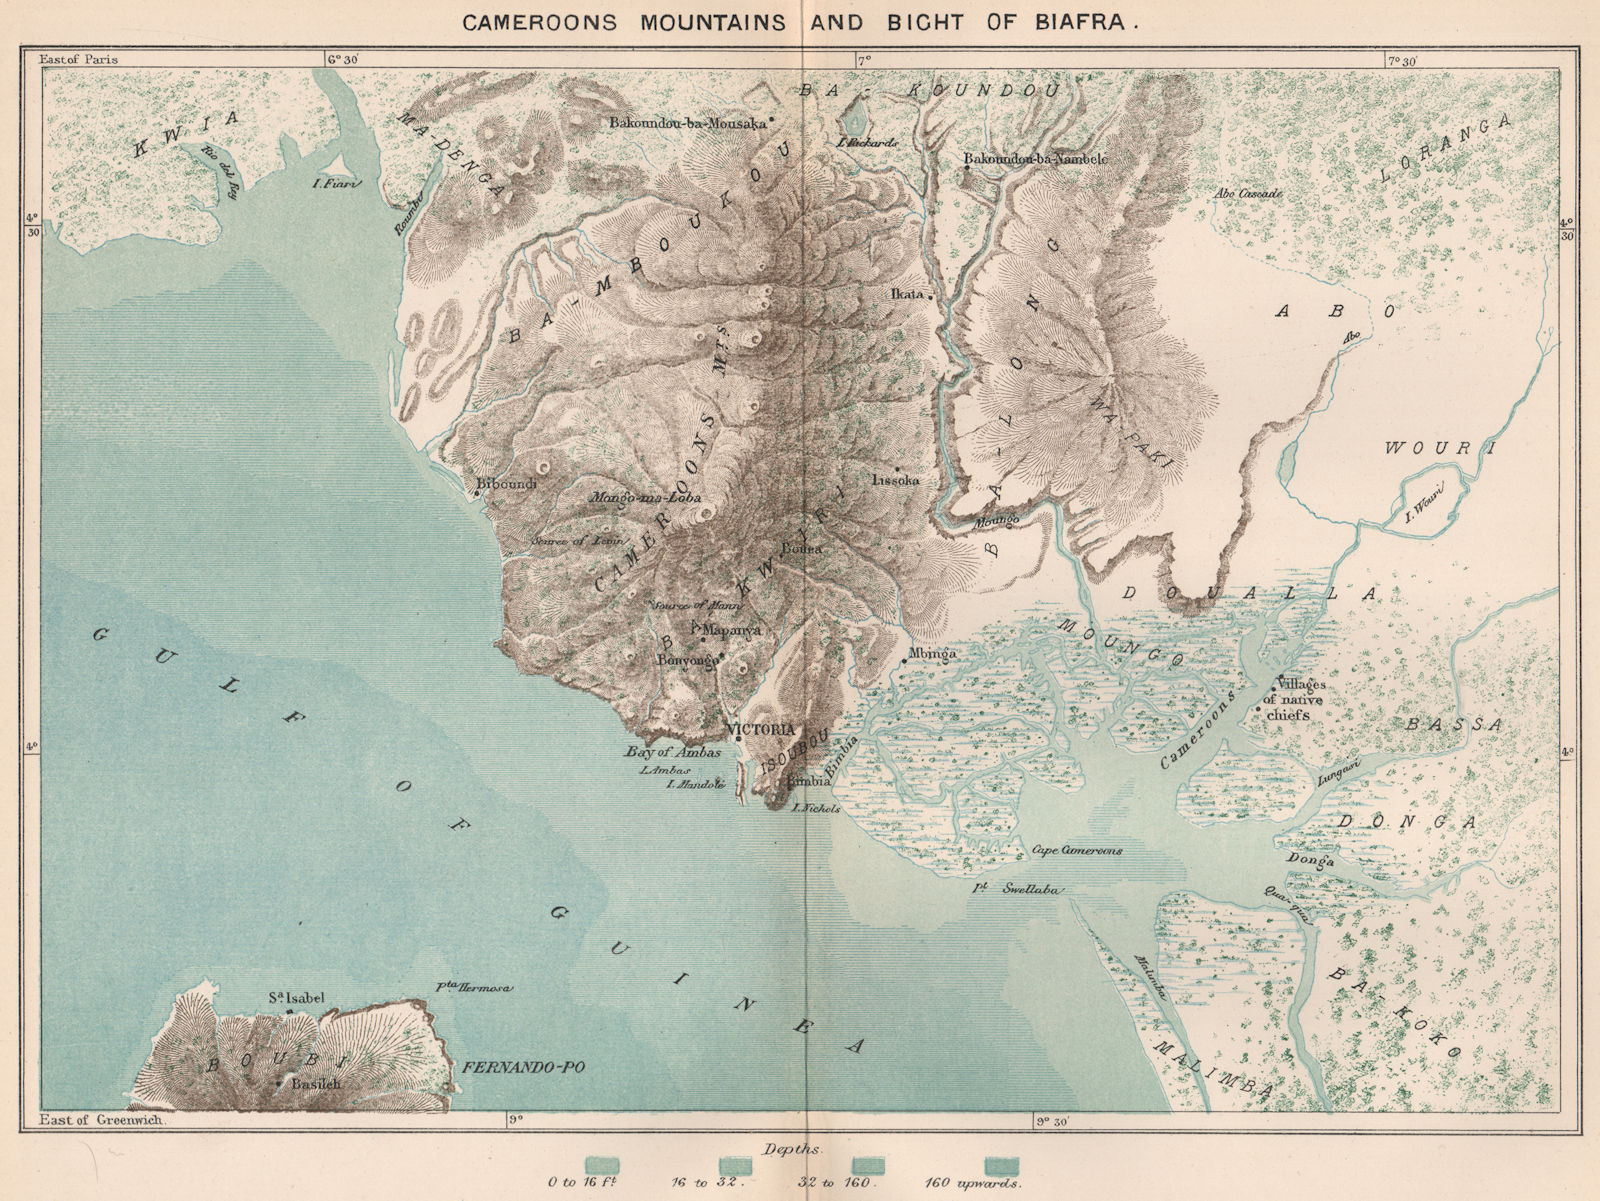 Cameroon Mountains and Bight of Biafra/Bonny. Bioko. Douala 1885 old map